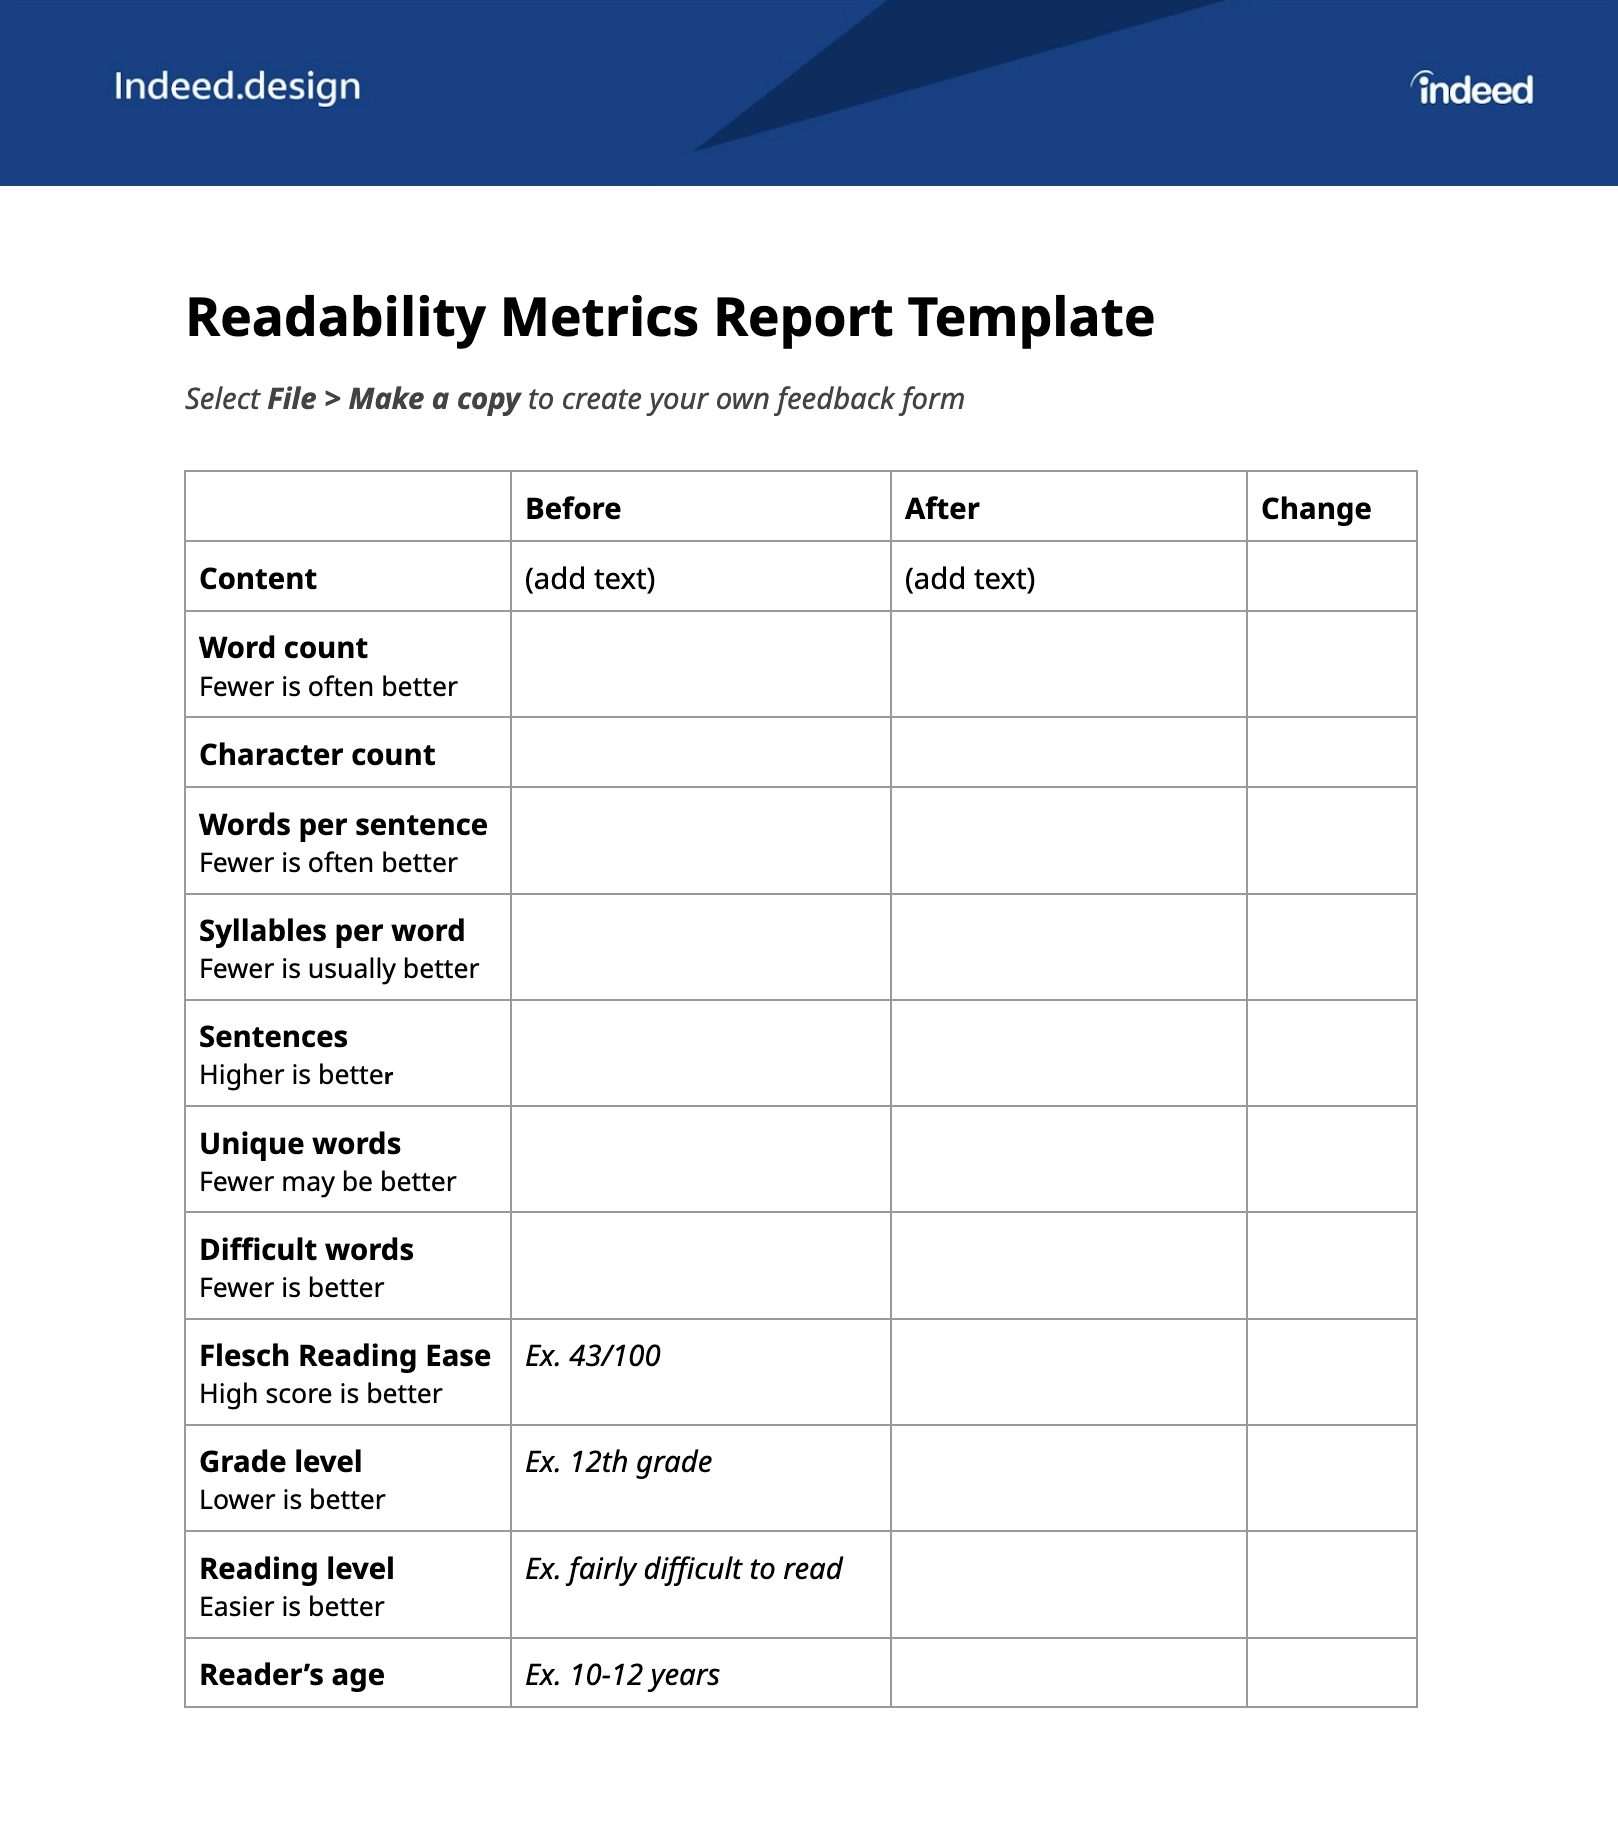 A screenshot of the readability metrics report template, which is a table of four columns and example text to show readers how it's used.